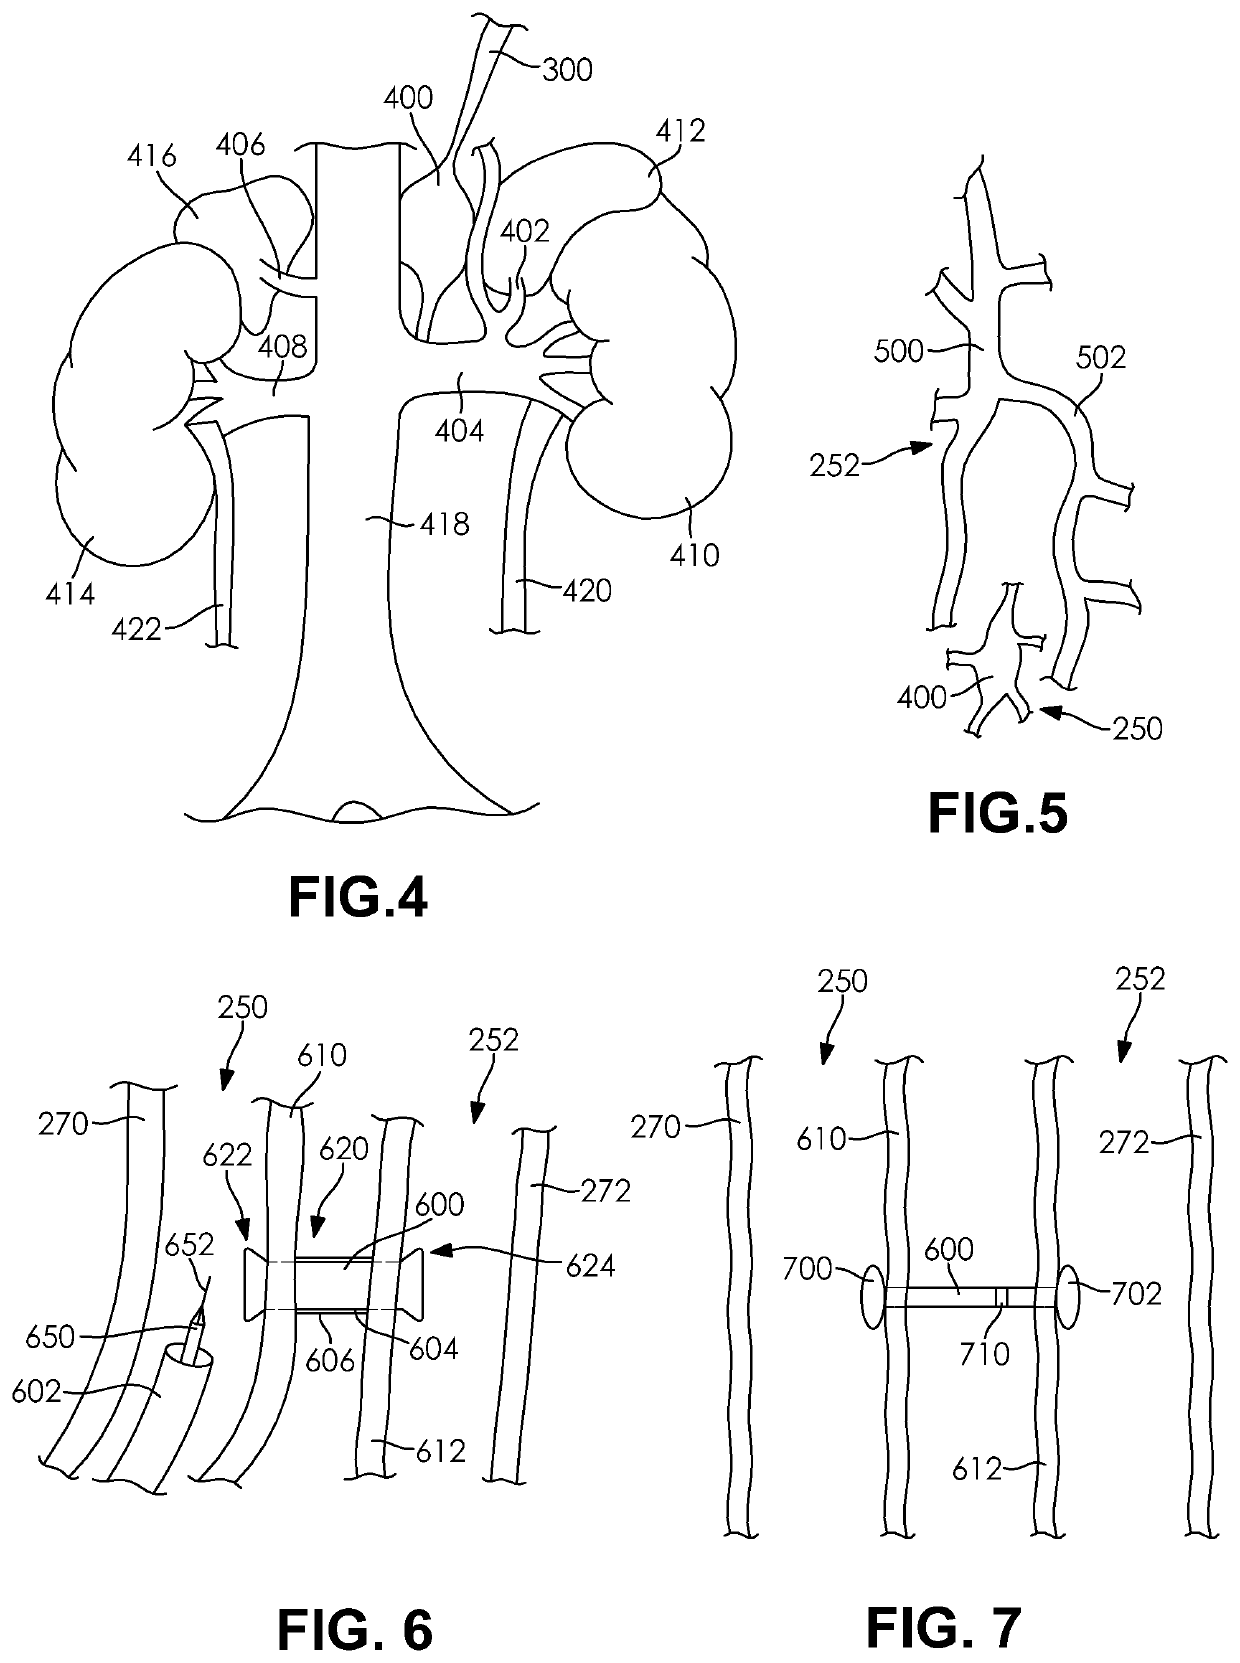 Devices and Methods for Treating Congestive Heart Failure, Ascites, and Other Disorders Relating to Excess Bodily Fluid